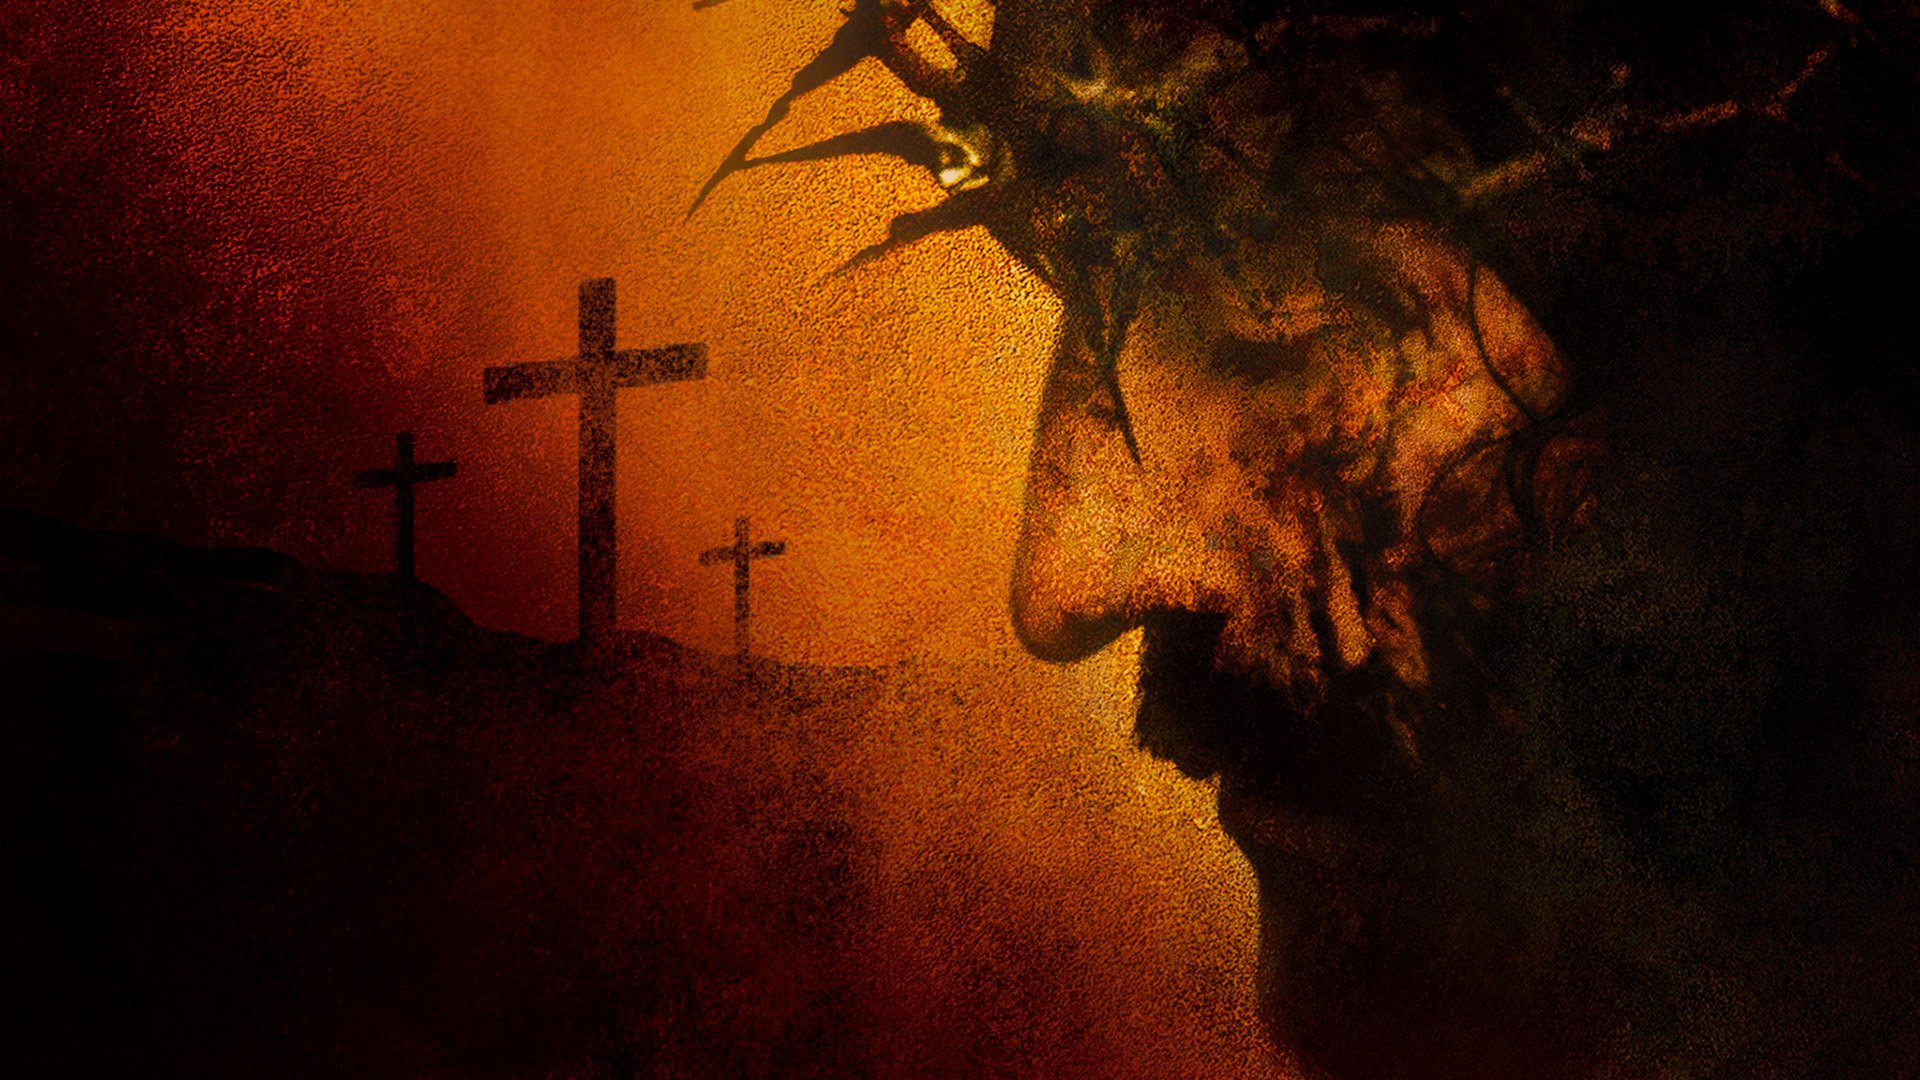 Best Pictures Passion Of The Christ - 1920x1080 Wallpaper 